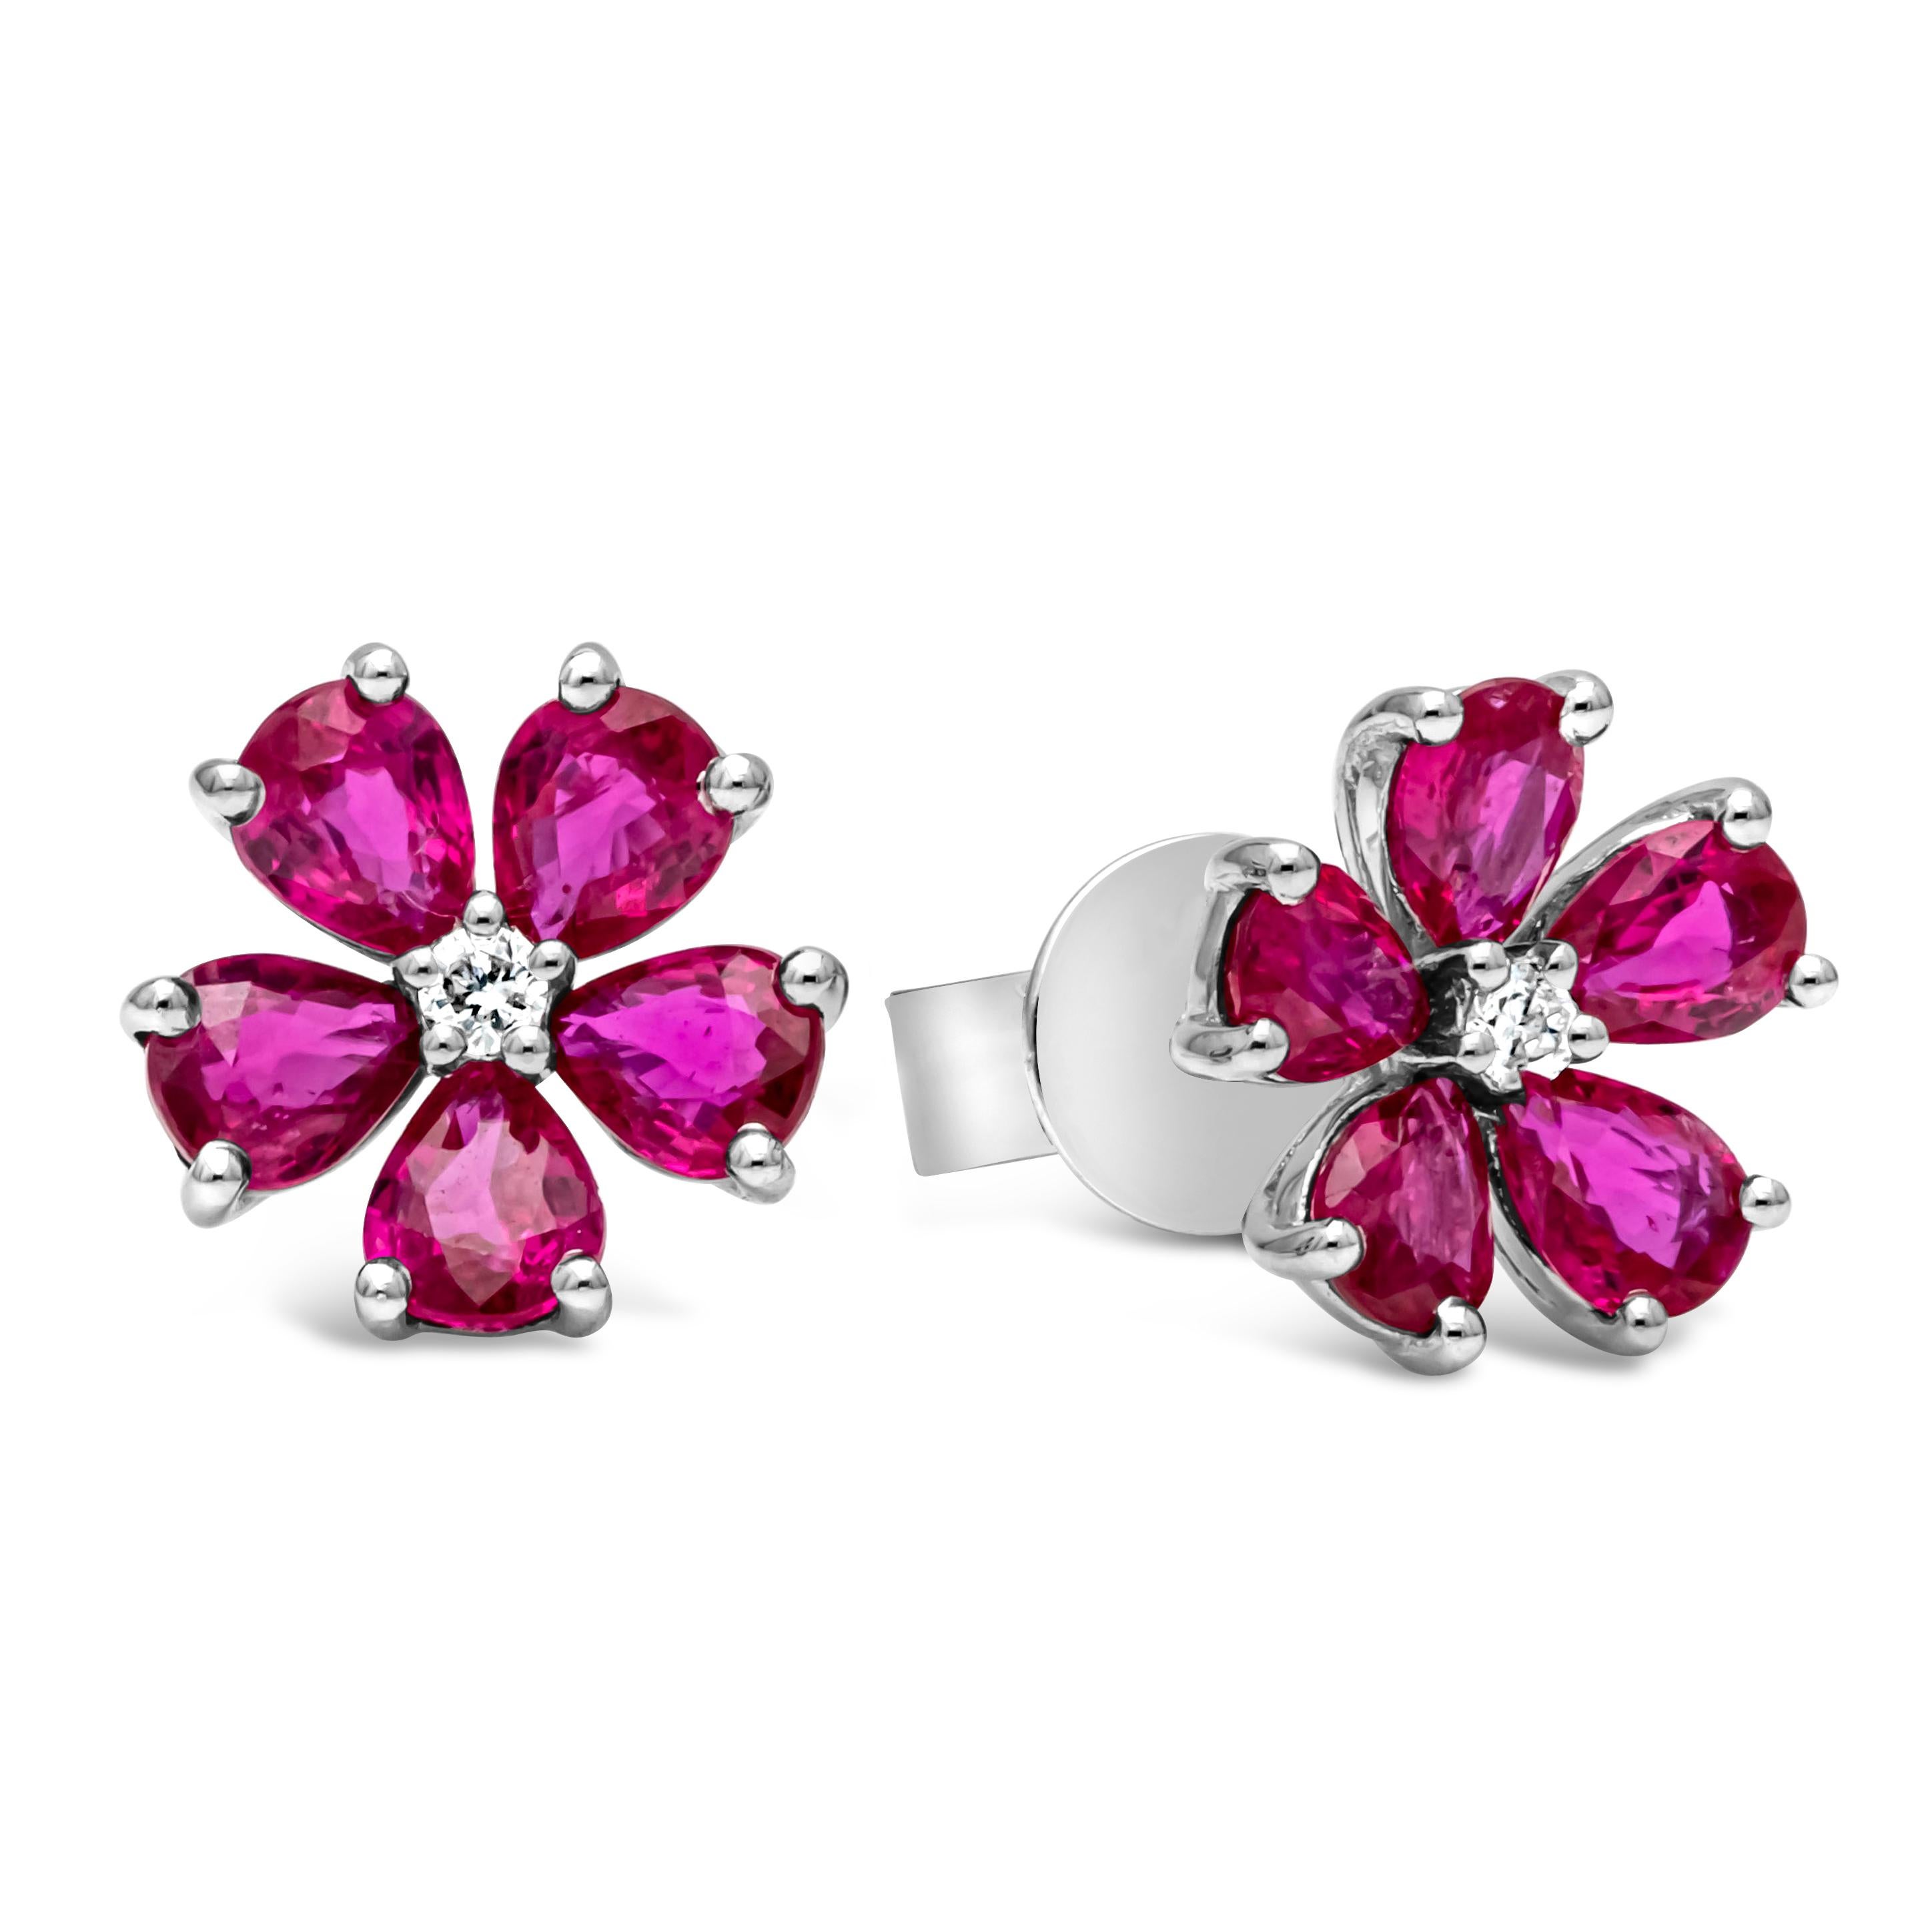 A beautiful pair of stud earrings featuring a round shape brilliant diamond center weighing 0.04 carats total, F color, VS in clarity and set in a five prong basket setting. Accented with color-rich pear shape ruby set in a floral-motif design and